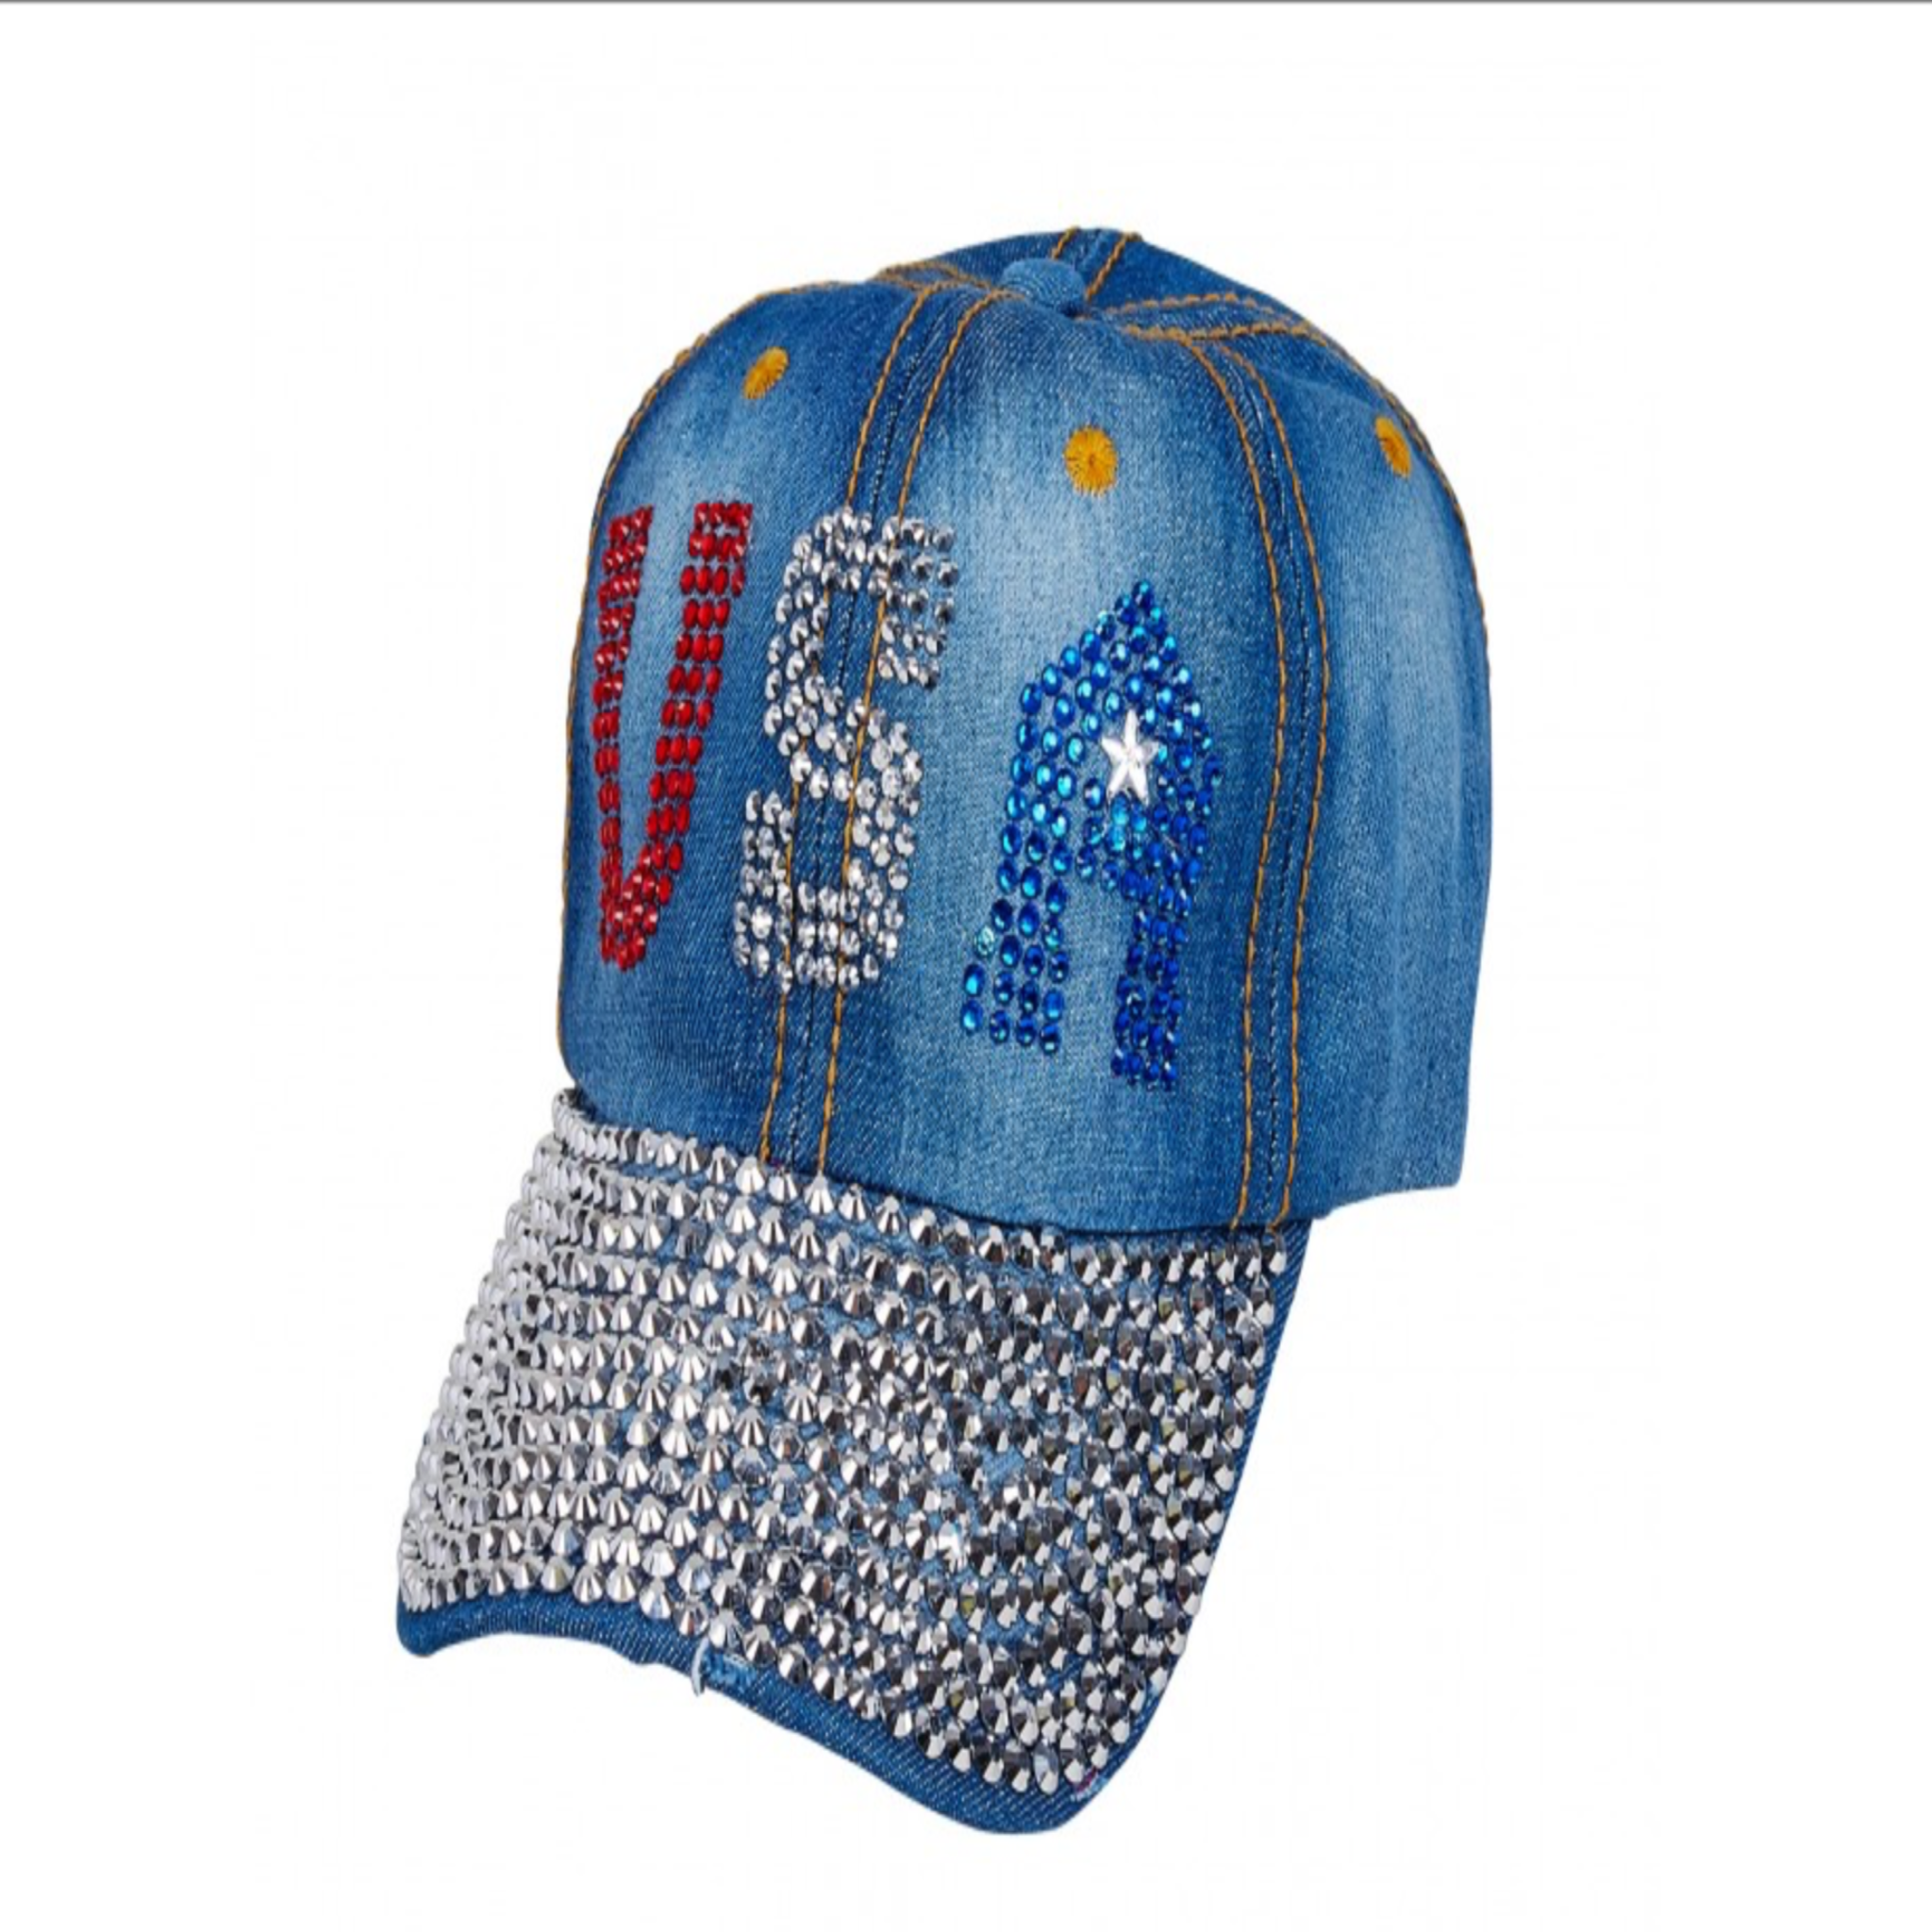 Cappelli Mens Bling Baseball Caps Full Casquette With Printed Letter  Firmati Design For Sun Protection And Street Style From Monopods007, $30.16